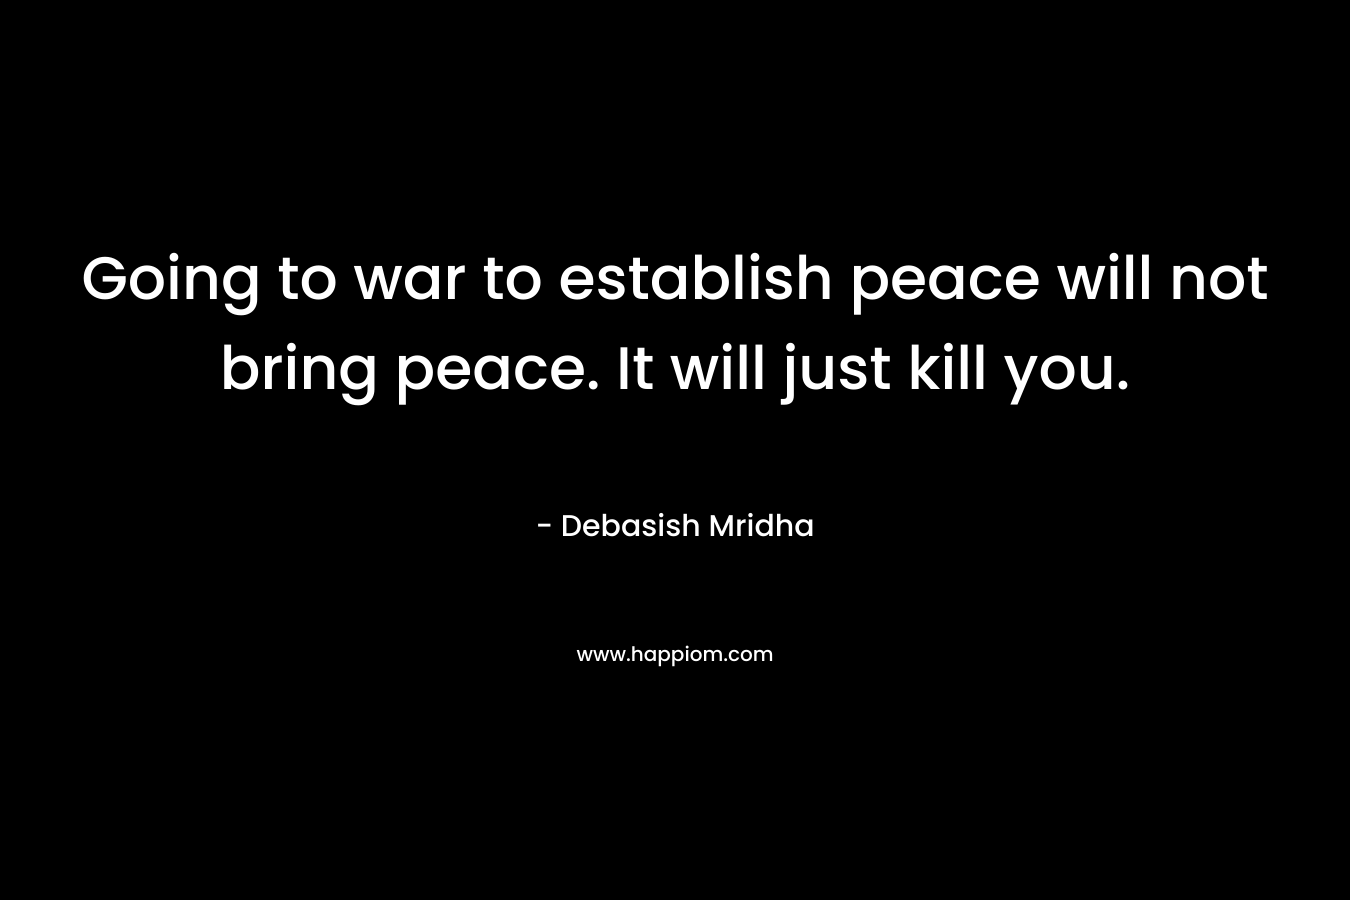 Going to war to establish peace will not bring peace. It will just kill you.